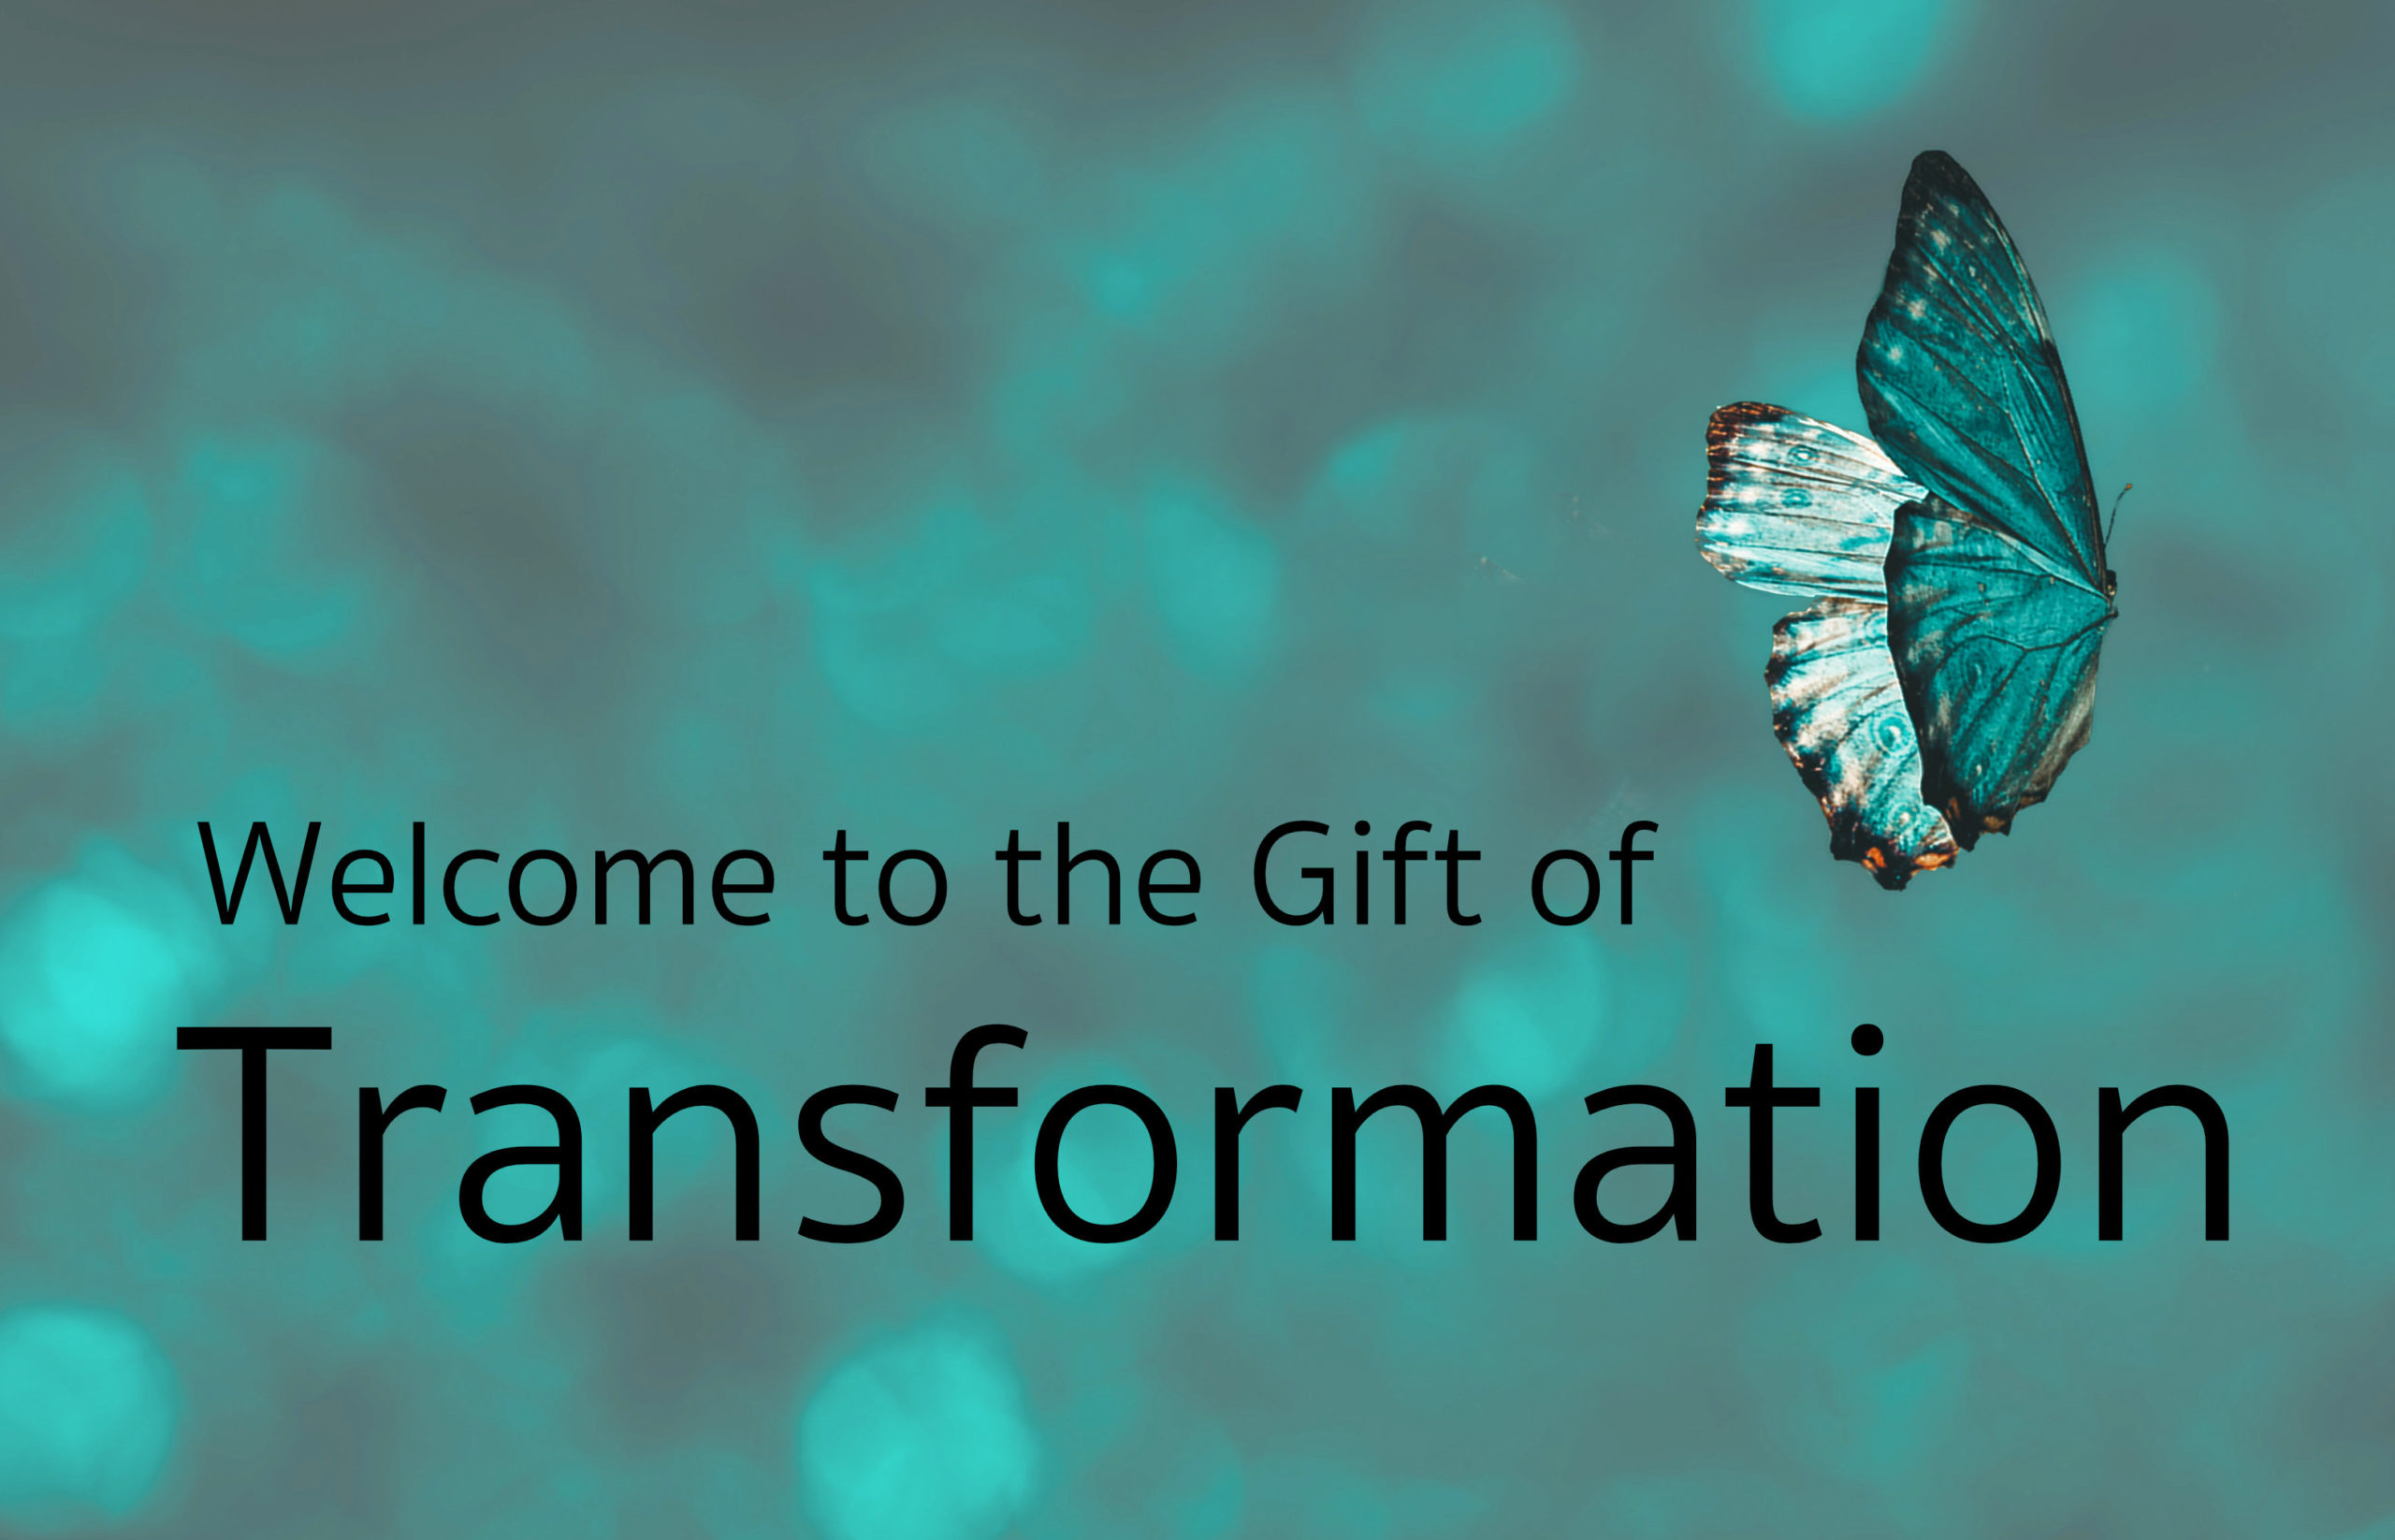 Welcome to the Gift of Transformation